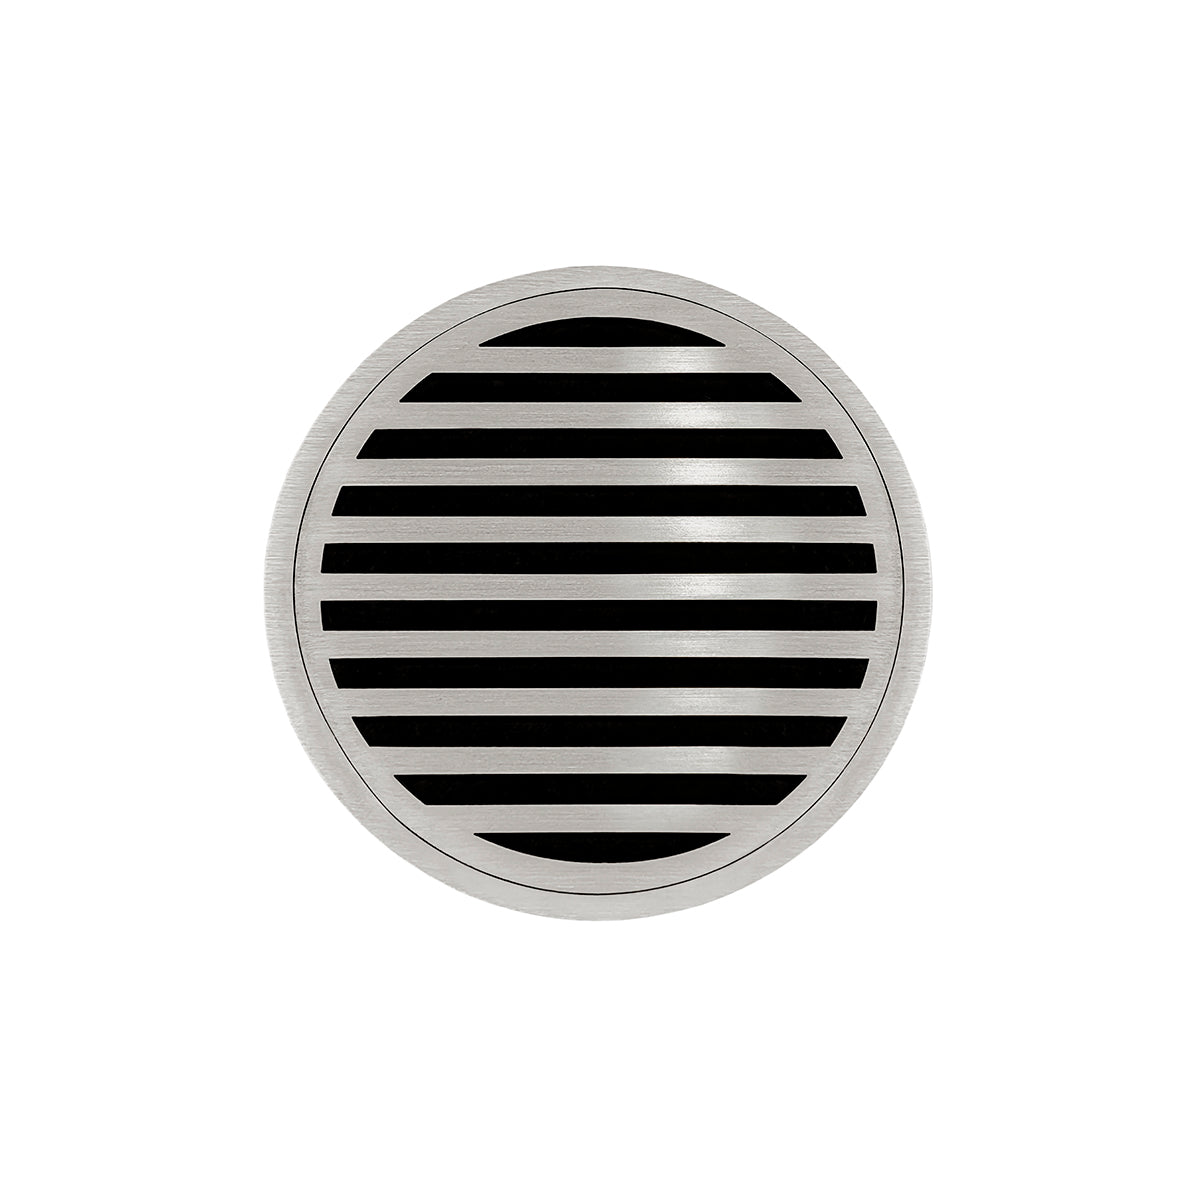 Infinity Drain 5" Round RND 5 Premium Center Drain Kit with Lines Pattern Decorative Plate with ABS Drain Body, 2" Outlet